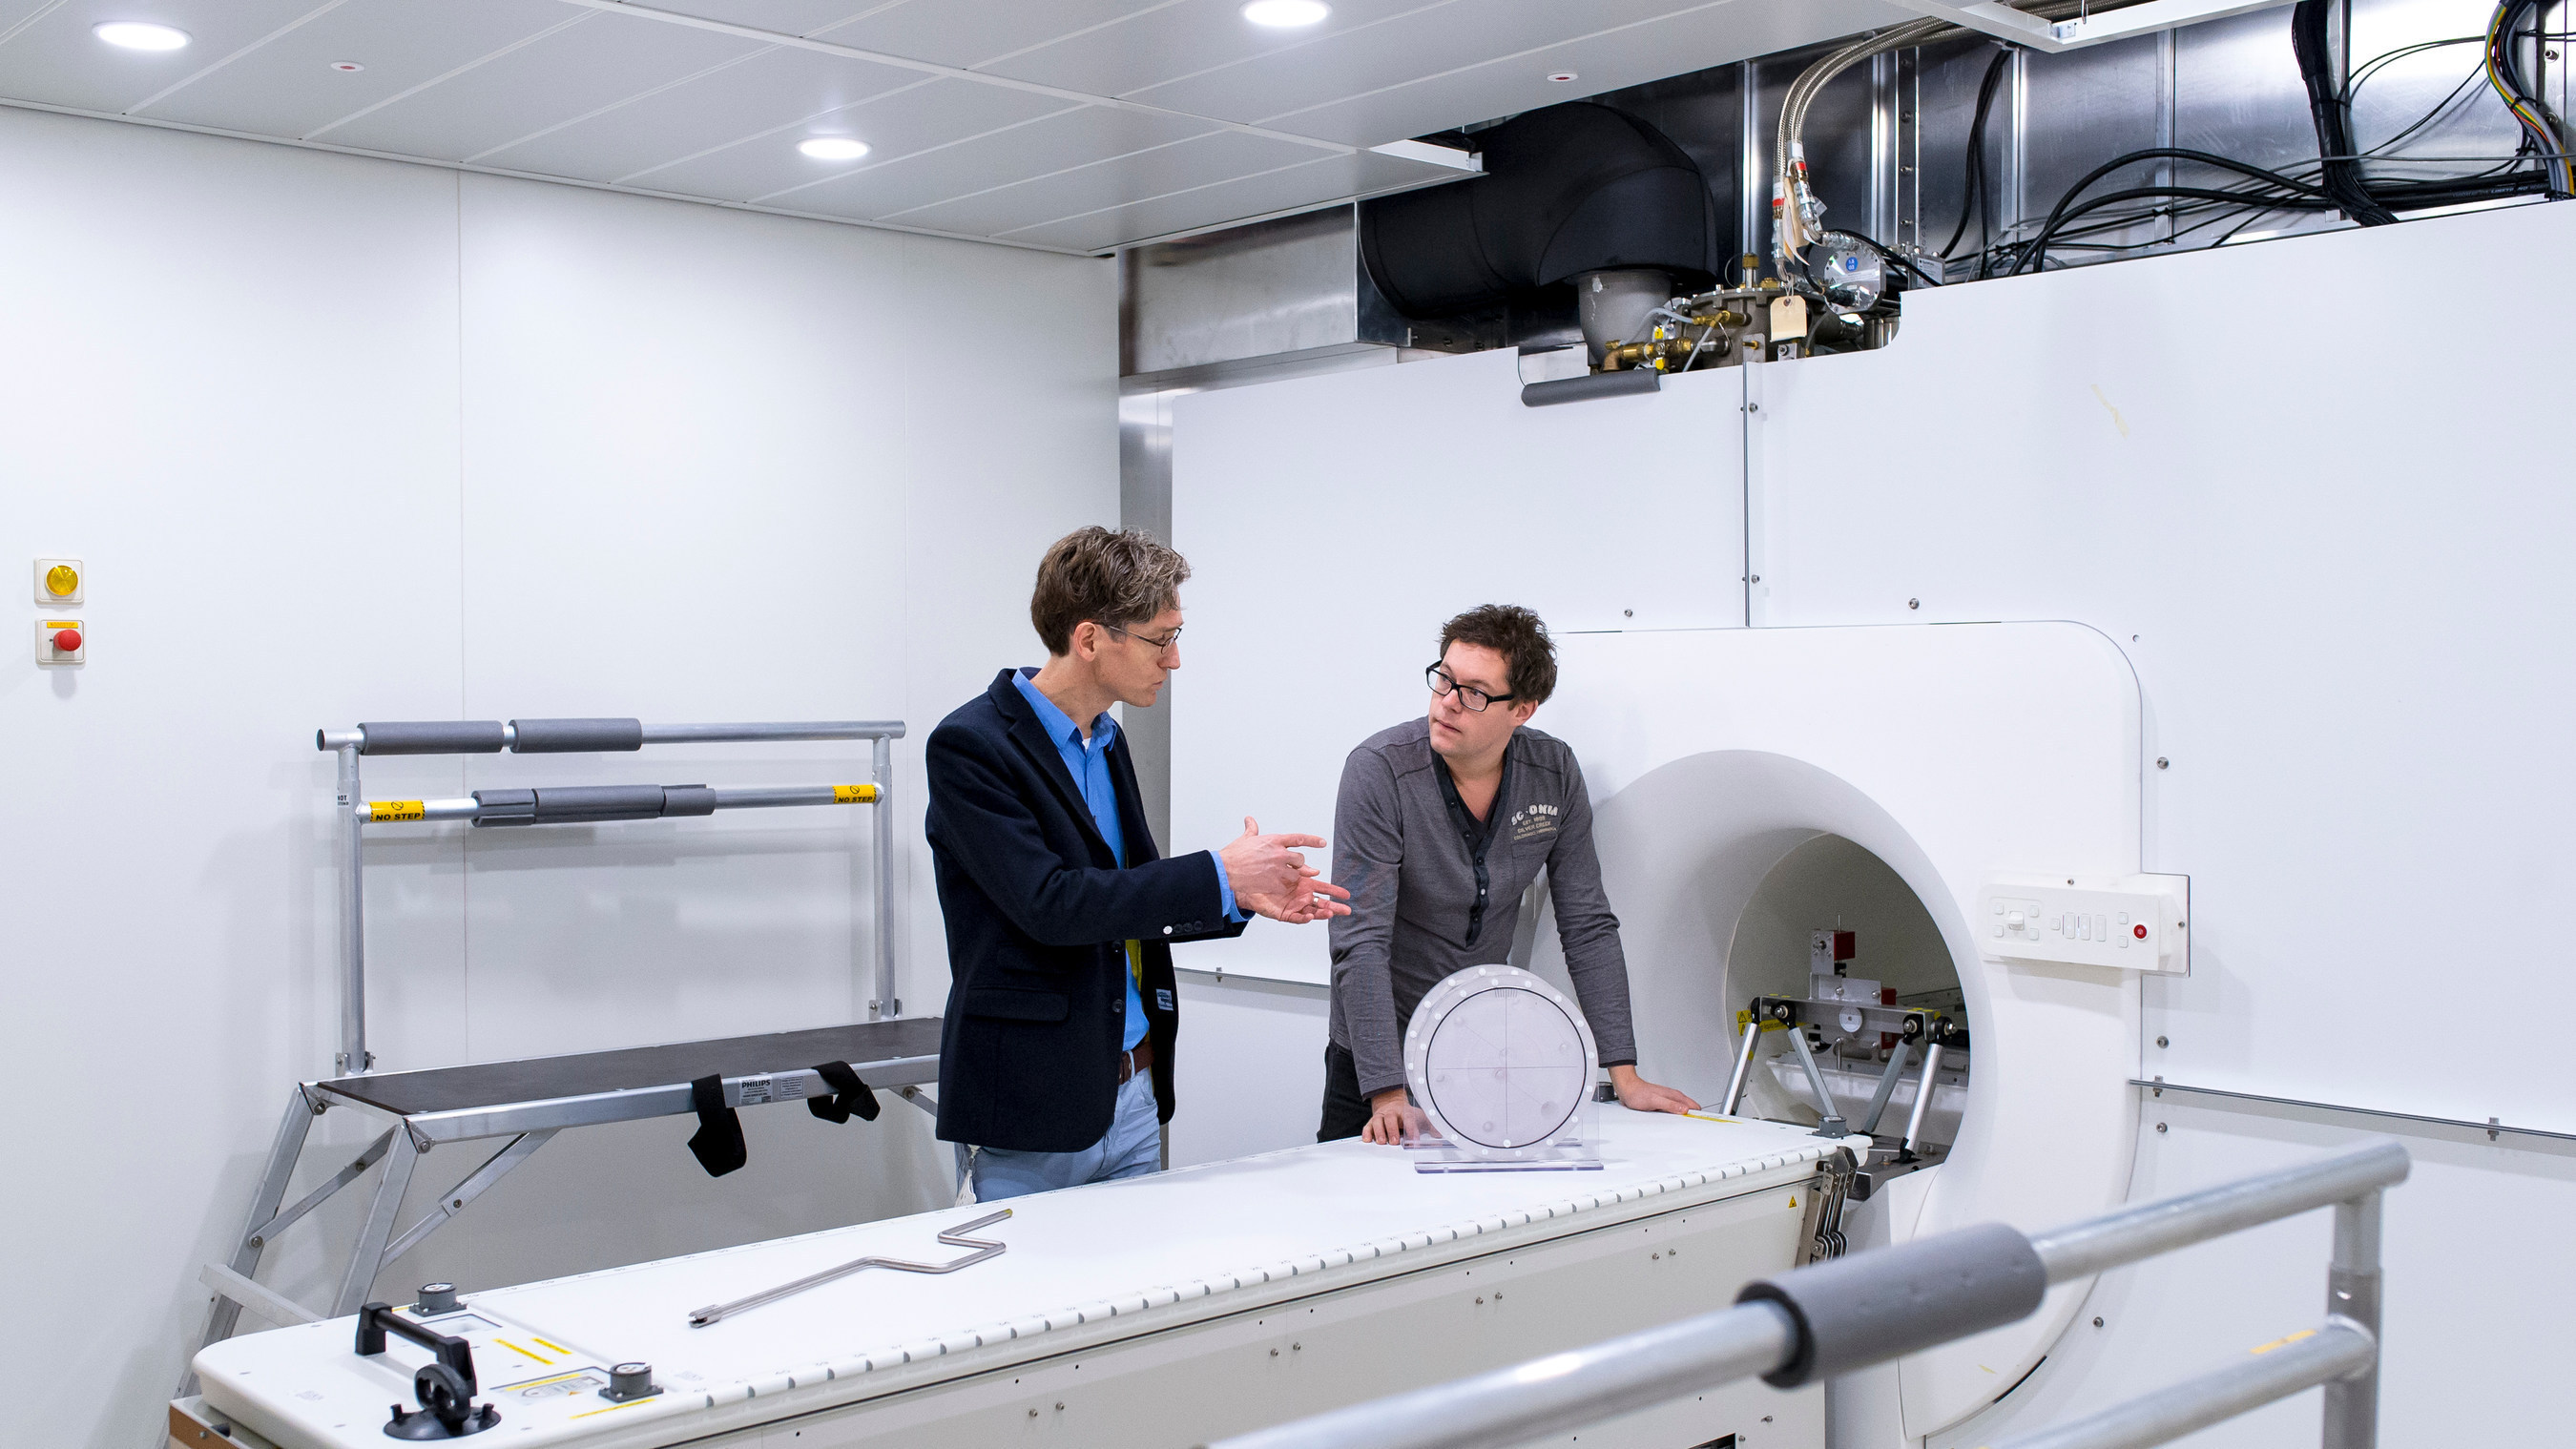 Bas Raaymakers (left), Professor, Experimental Clinical Physics at the University Medical Center Utrecht, in front of Elekta's Atlantic system with Robert Spaninks, Elekta Service Engineer. Elekta plans to launch Atlantic in 2017, making radiation therapy much more precise, with the purpose of improving the lives of cancer patients.